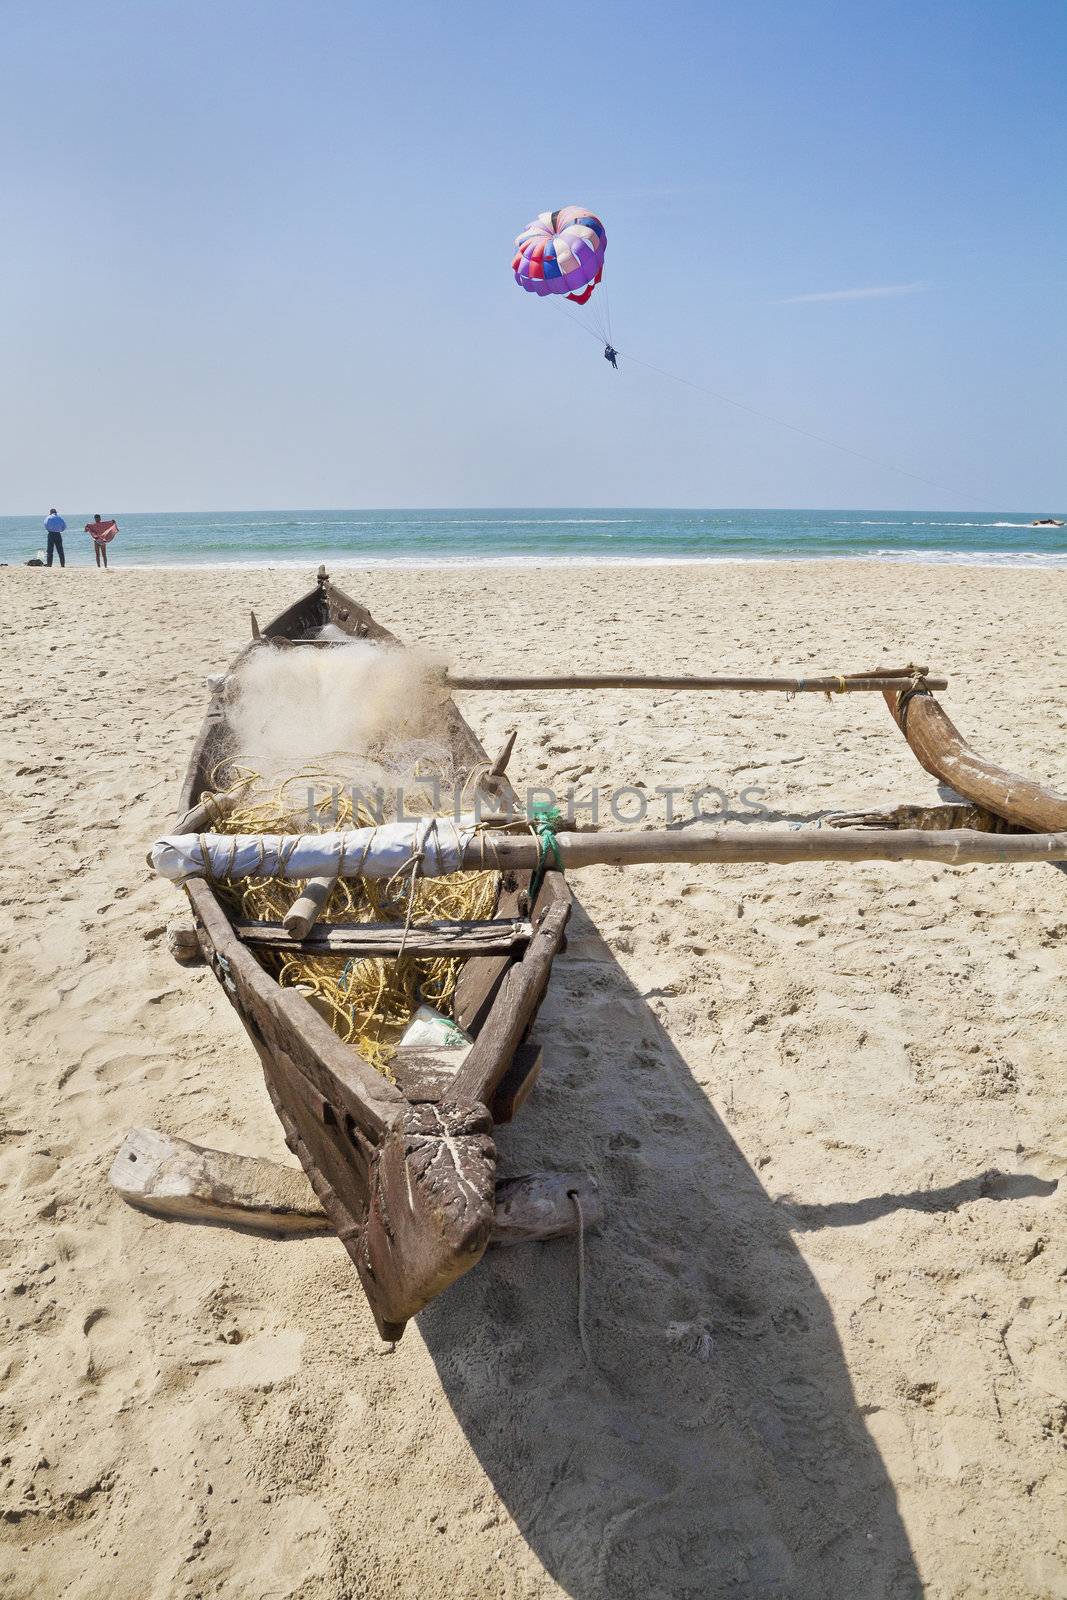 Horizontal landscape of a Goan beach in India with a moored fishermans boat on a sandy beach, bathers about to undress an get in the ocean while a paraglider drifts by